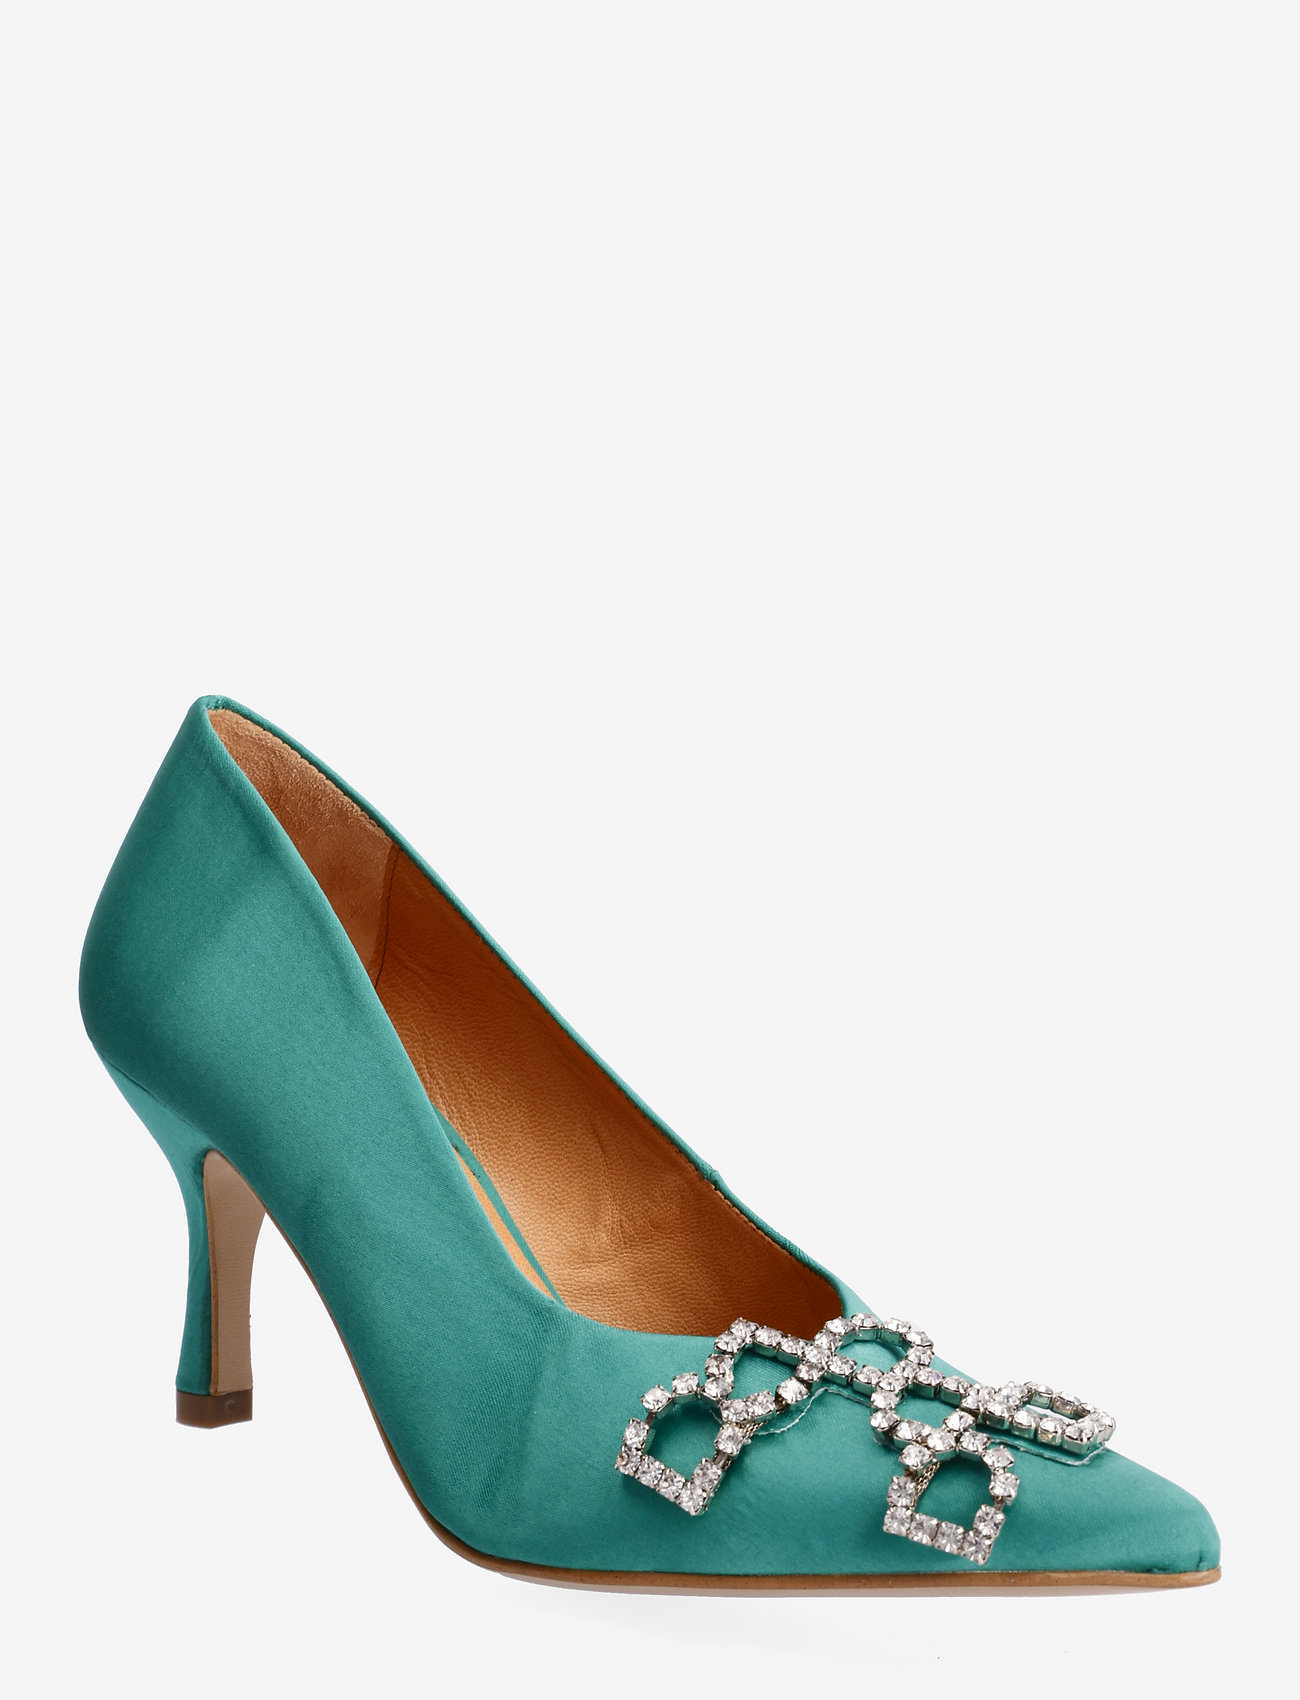 Day Birger et Mikkelsen - Miley - Satin Pump - party wear at outlet prices - bright green - 0